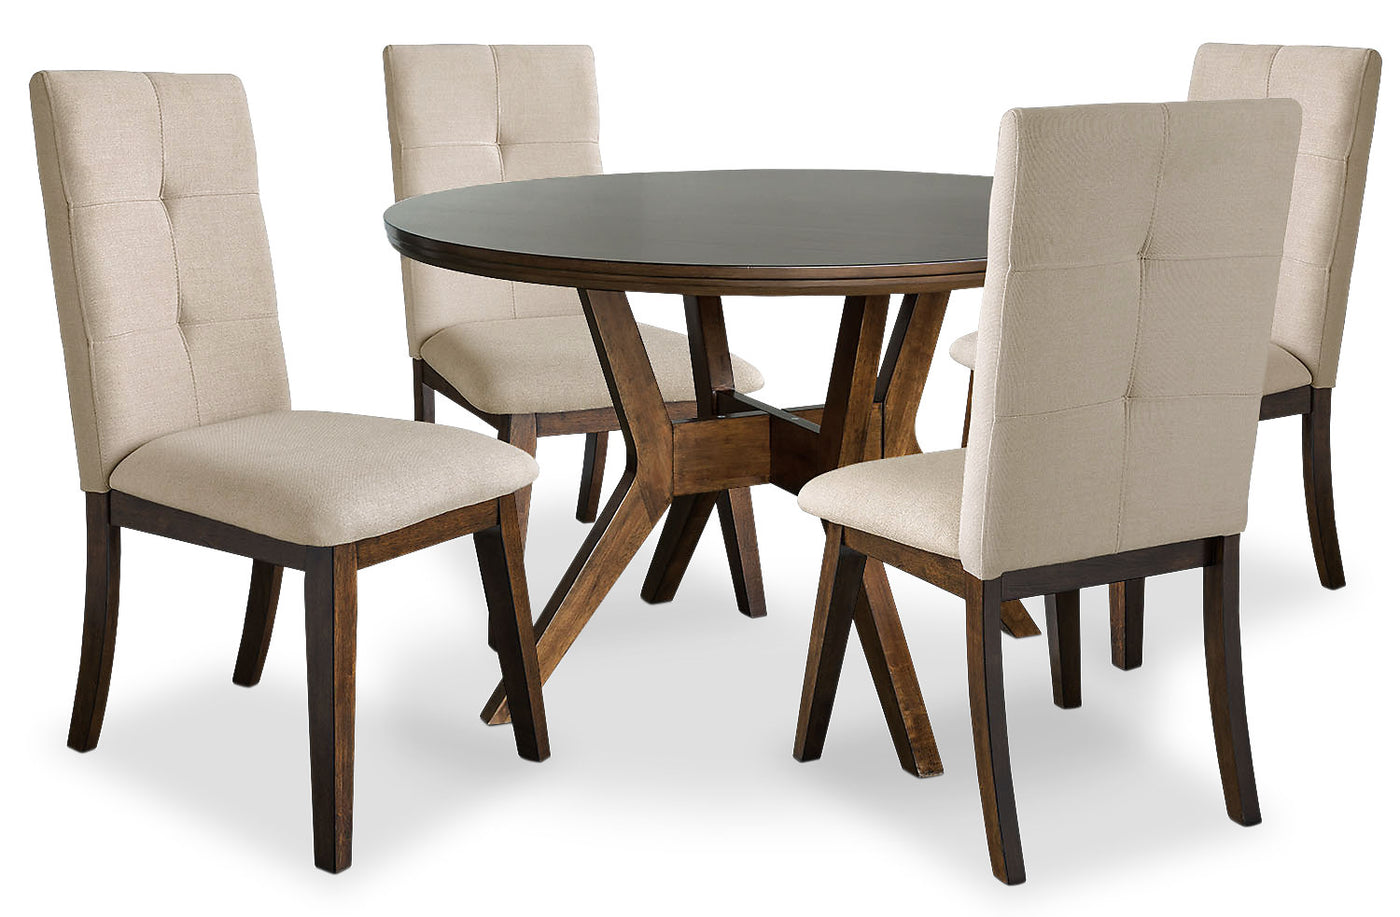 Chelsea 5 Piece Round Dining Table Package With Beige Chairs The Brick